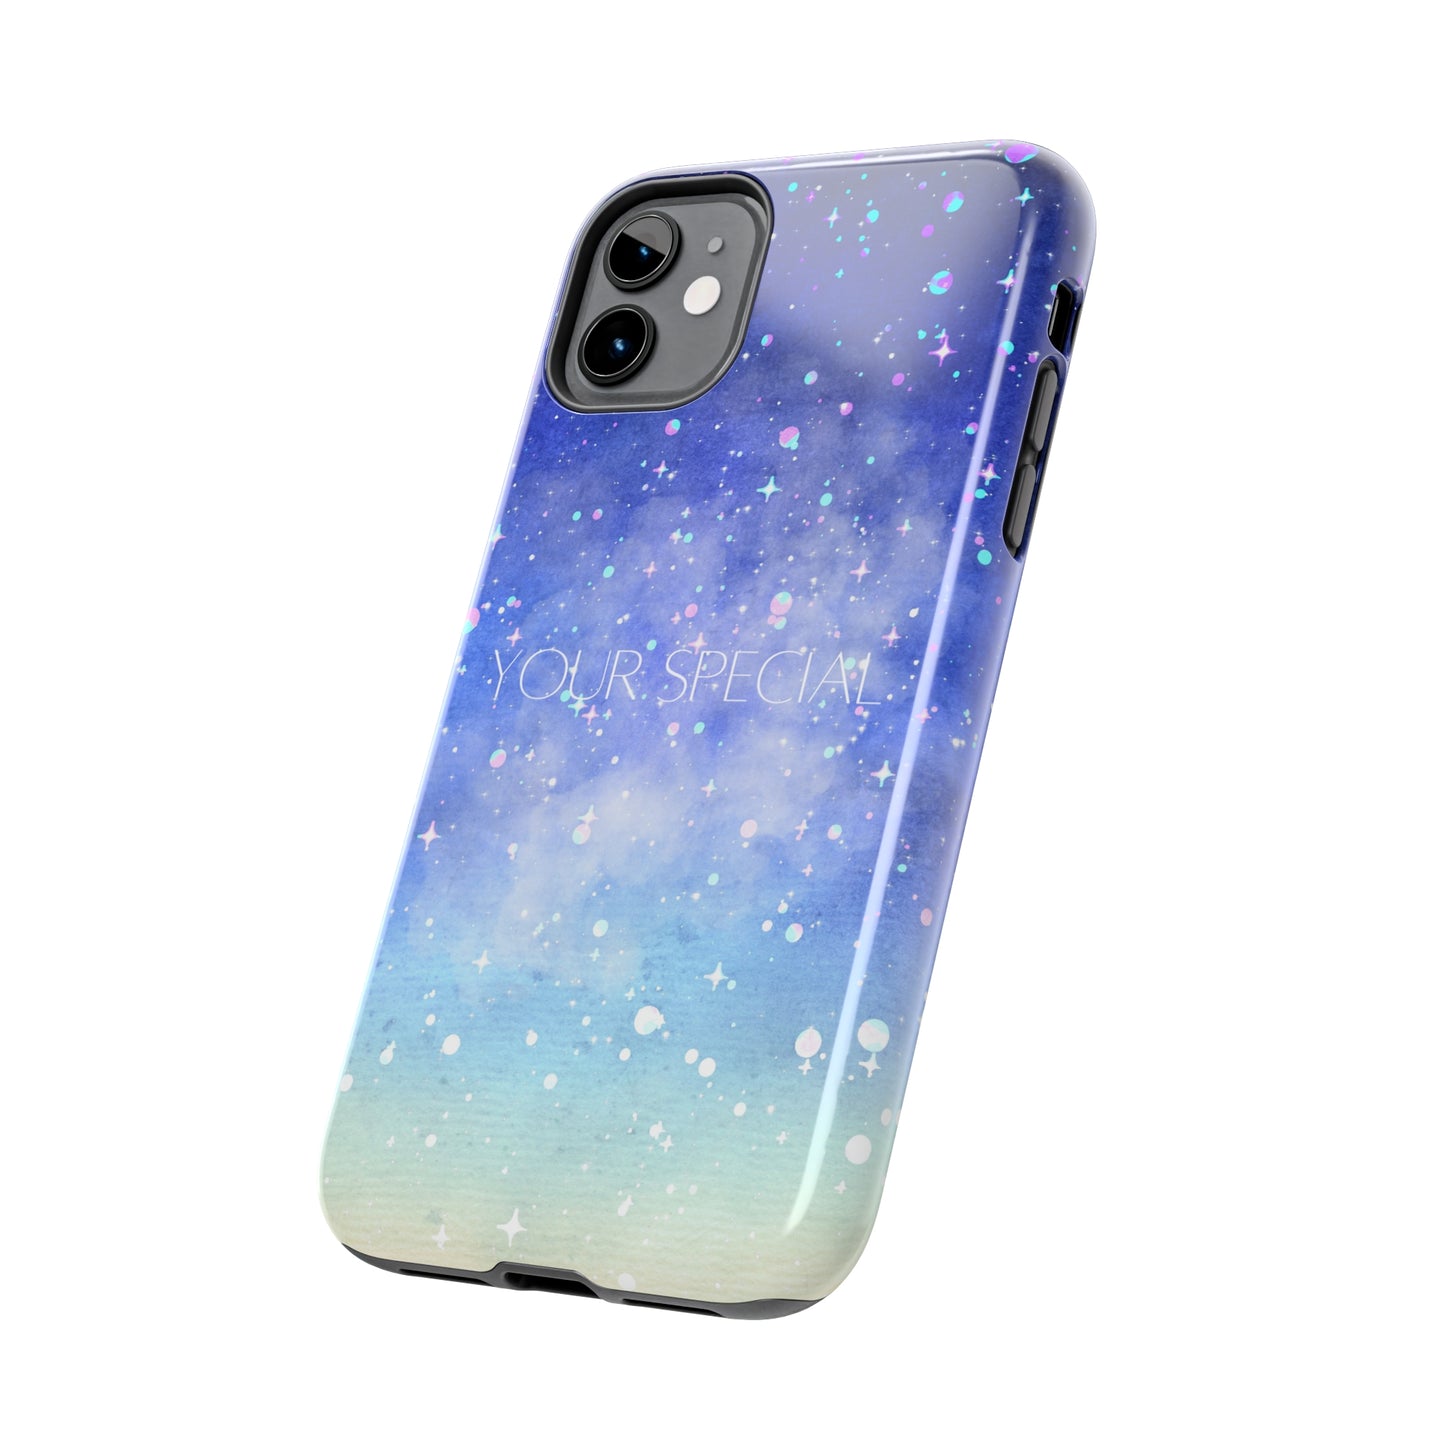 Your Special  - Blue - Custom Phone Case, Impact-Resistant Polycarbonate Shell, Wireless Charging, iPhone 7, 8, X, 11, 12, 13, 14 & more. Printify